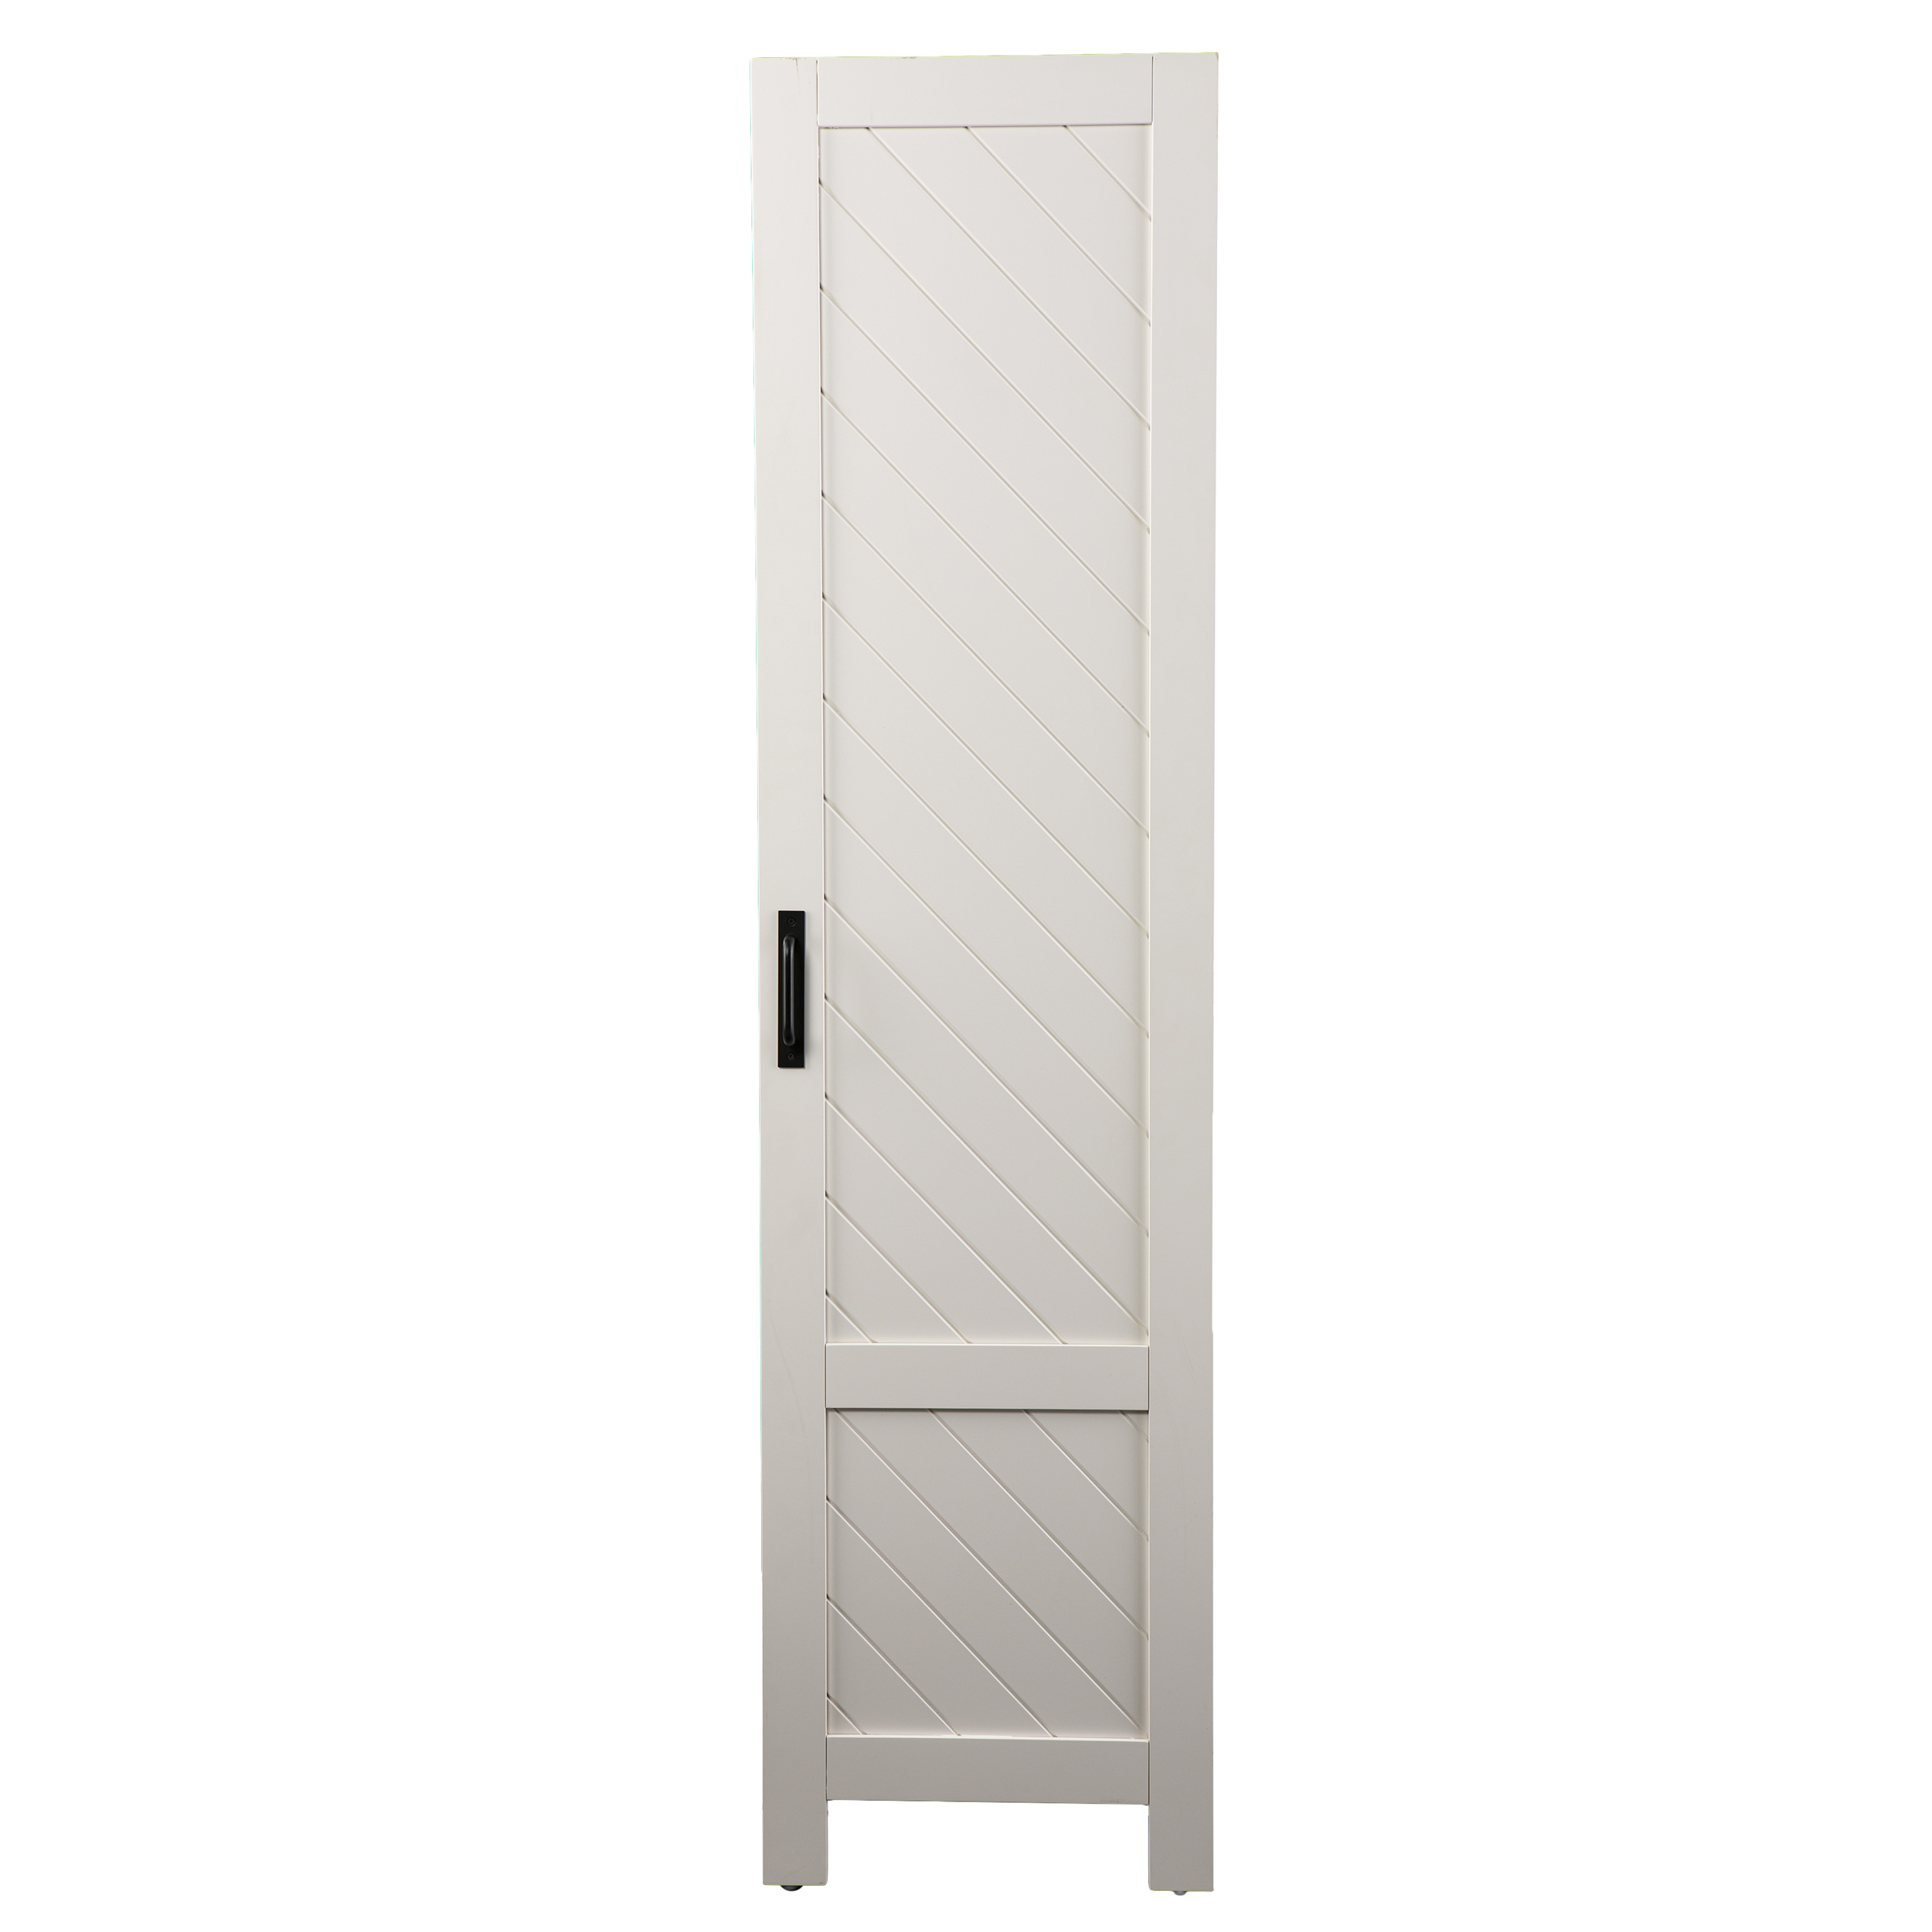 Southern Enterprises Trileigh Modern Farmhouse Style 3-Panel Room Divider in White finish - image 4 of 7